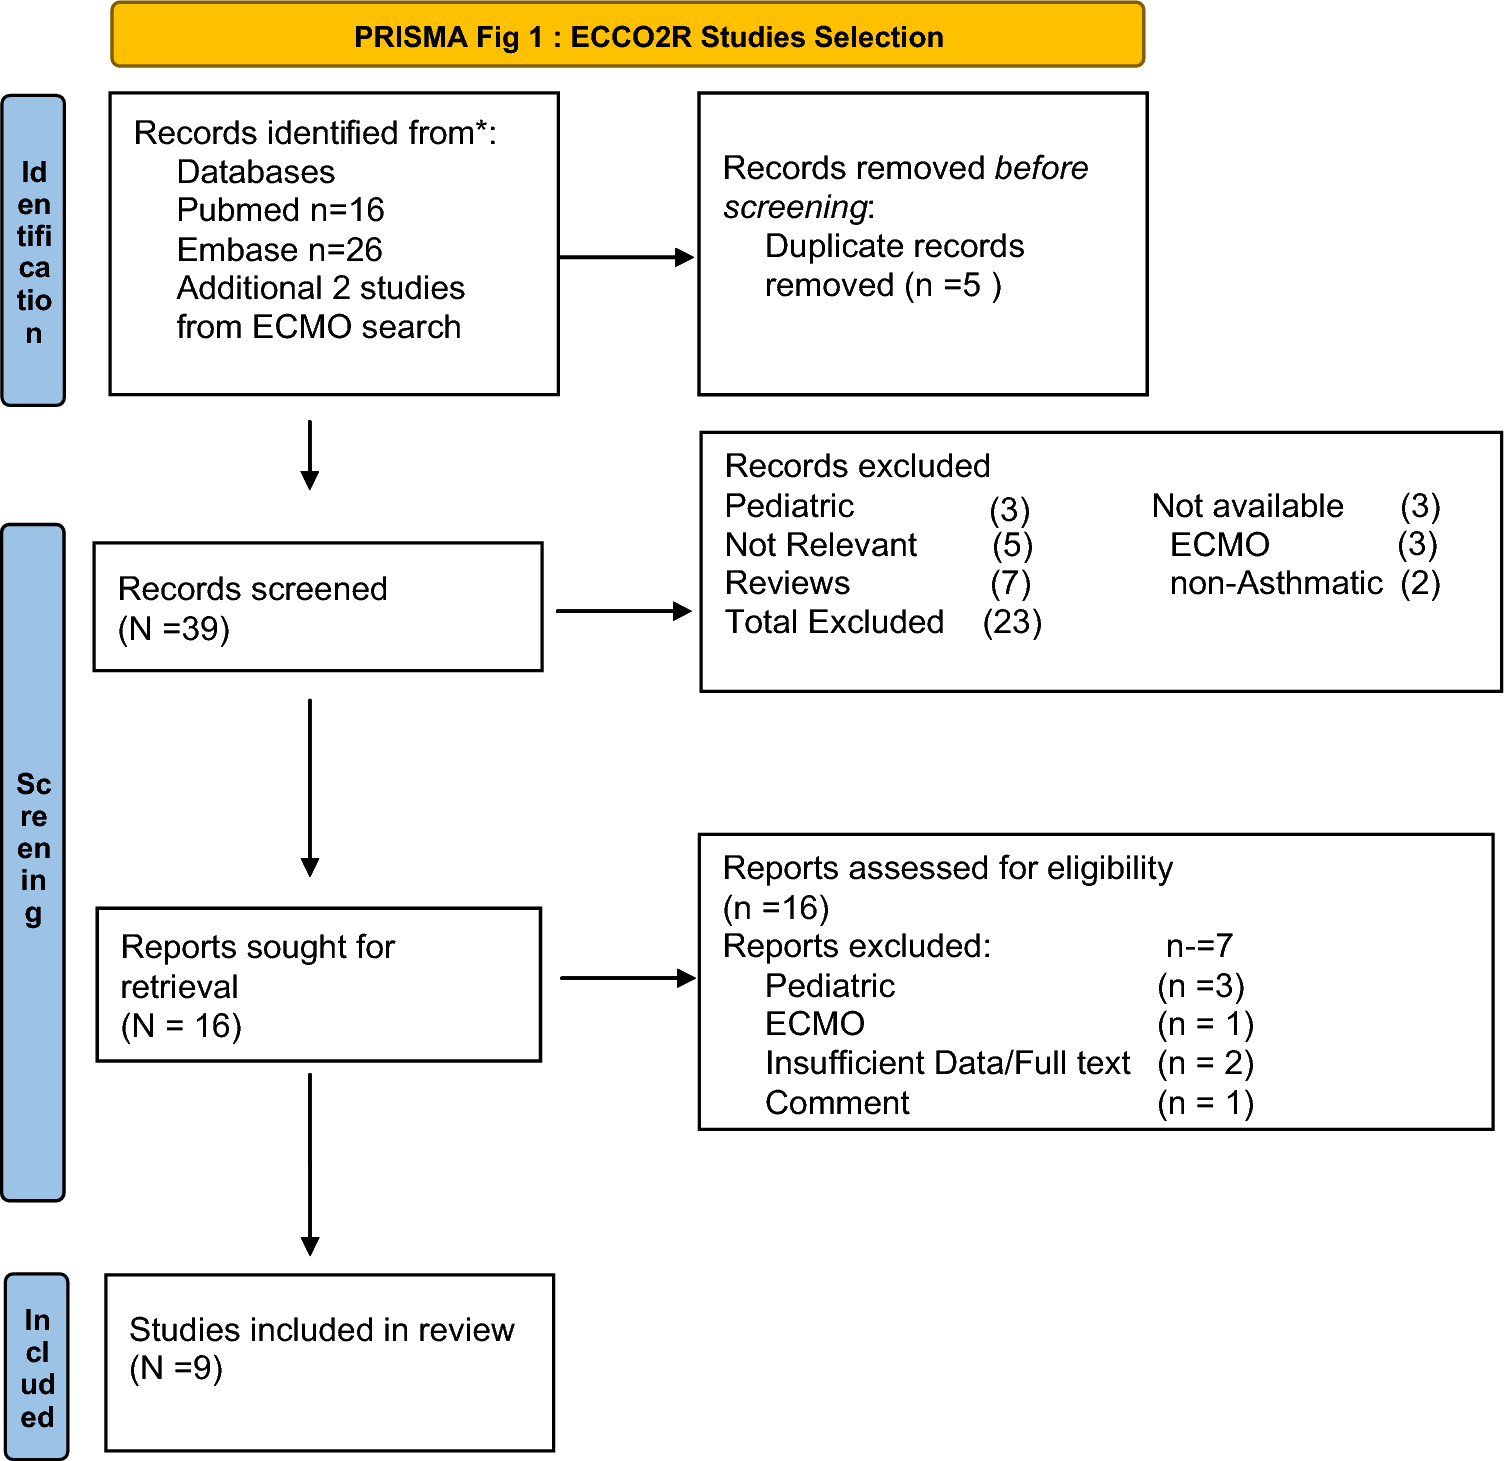 Outcomes of Extracorporeal Life Support (ECLS) in Acute Severe Asthma: A Narrative Review